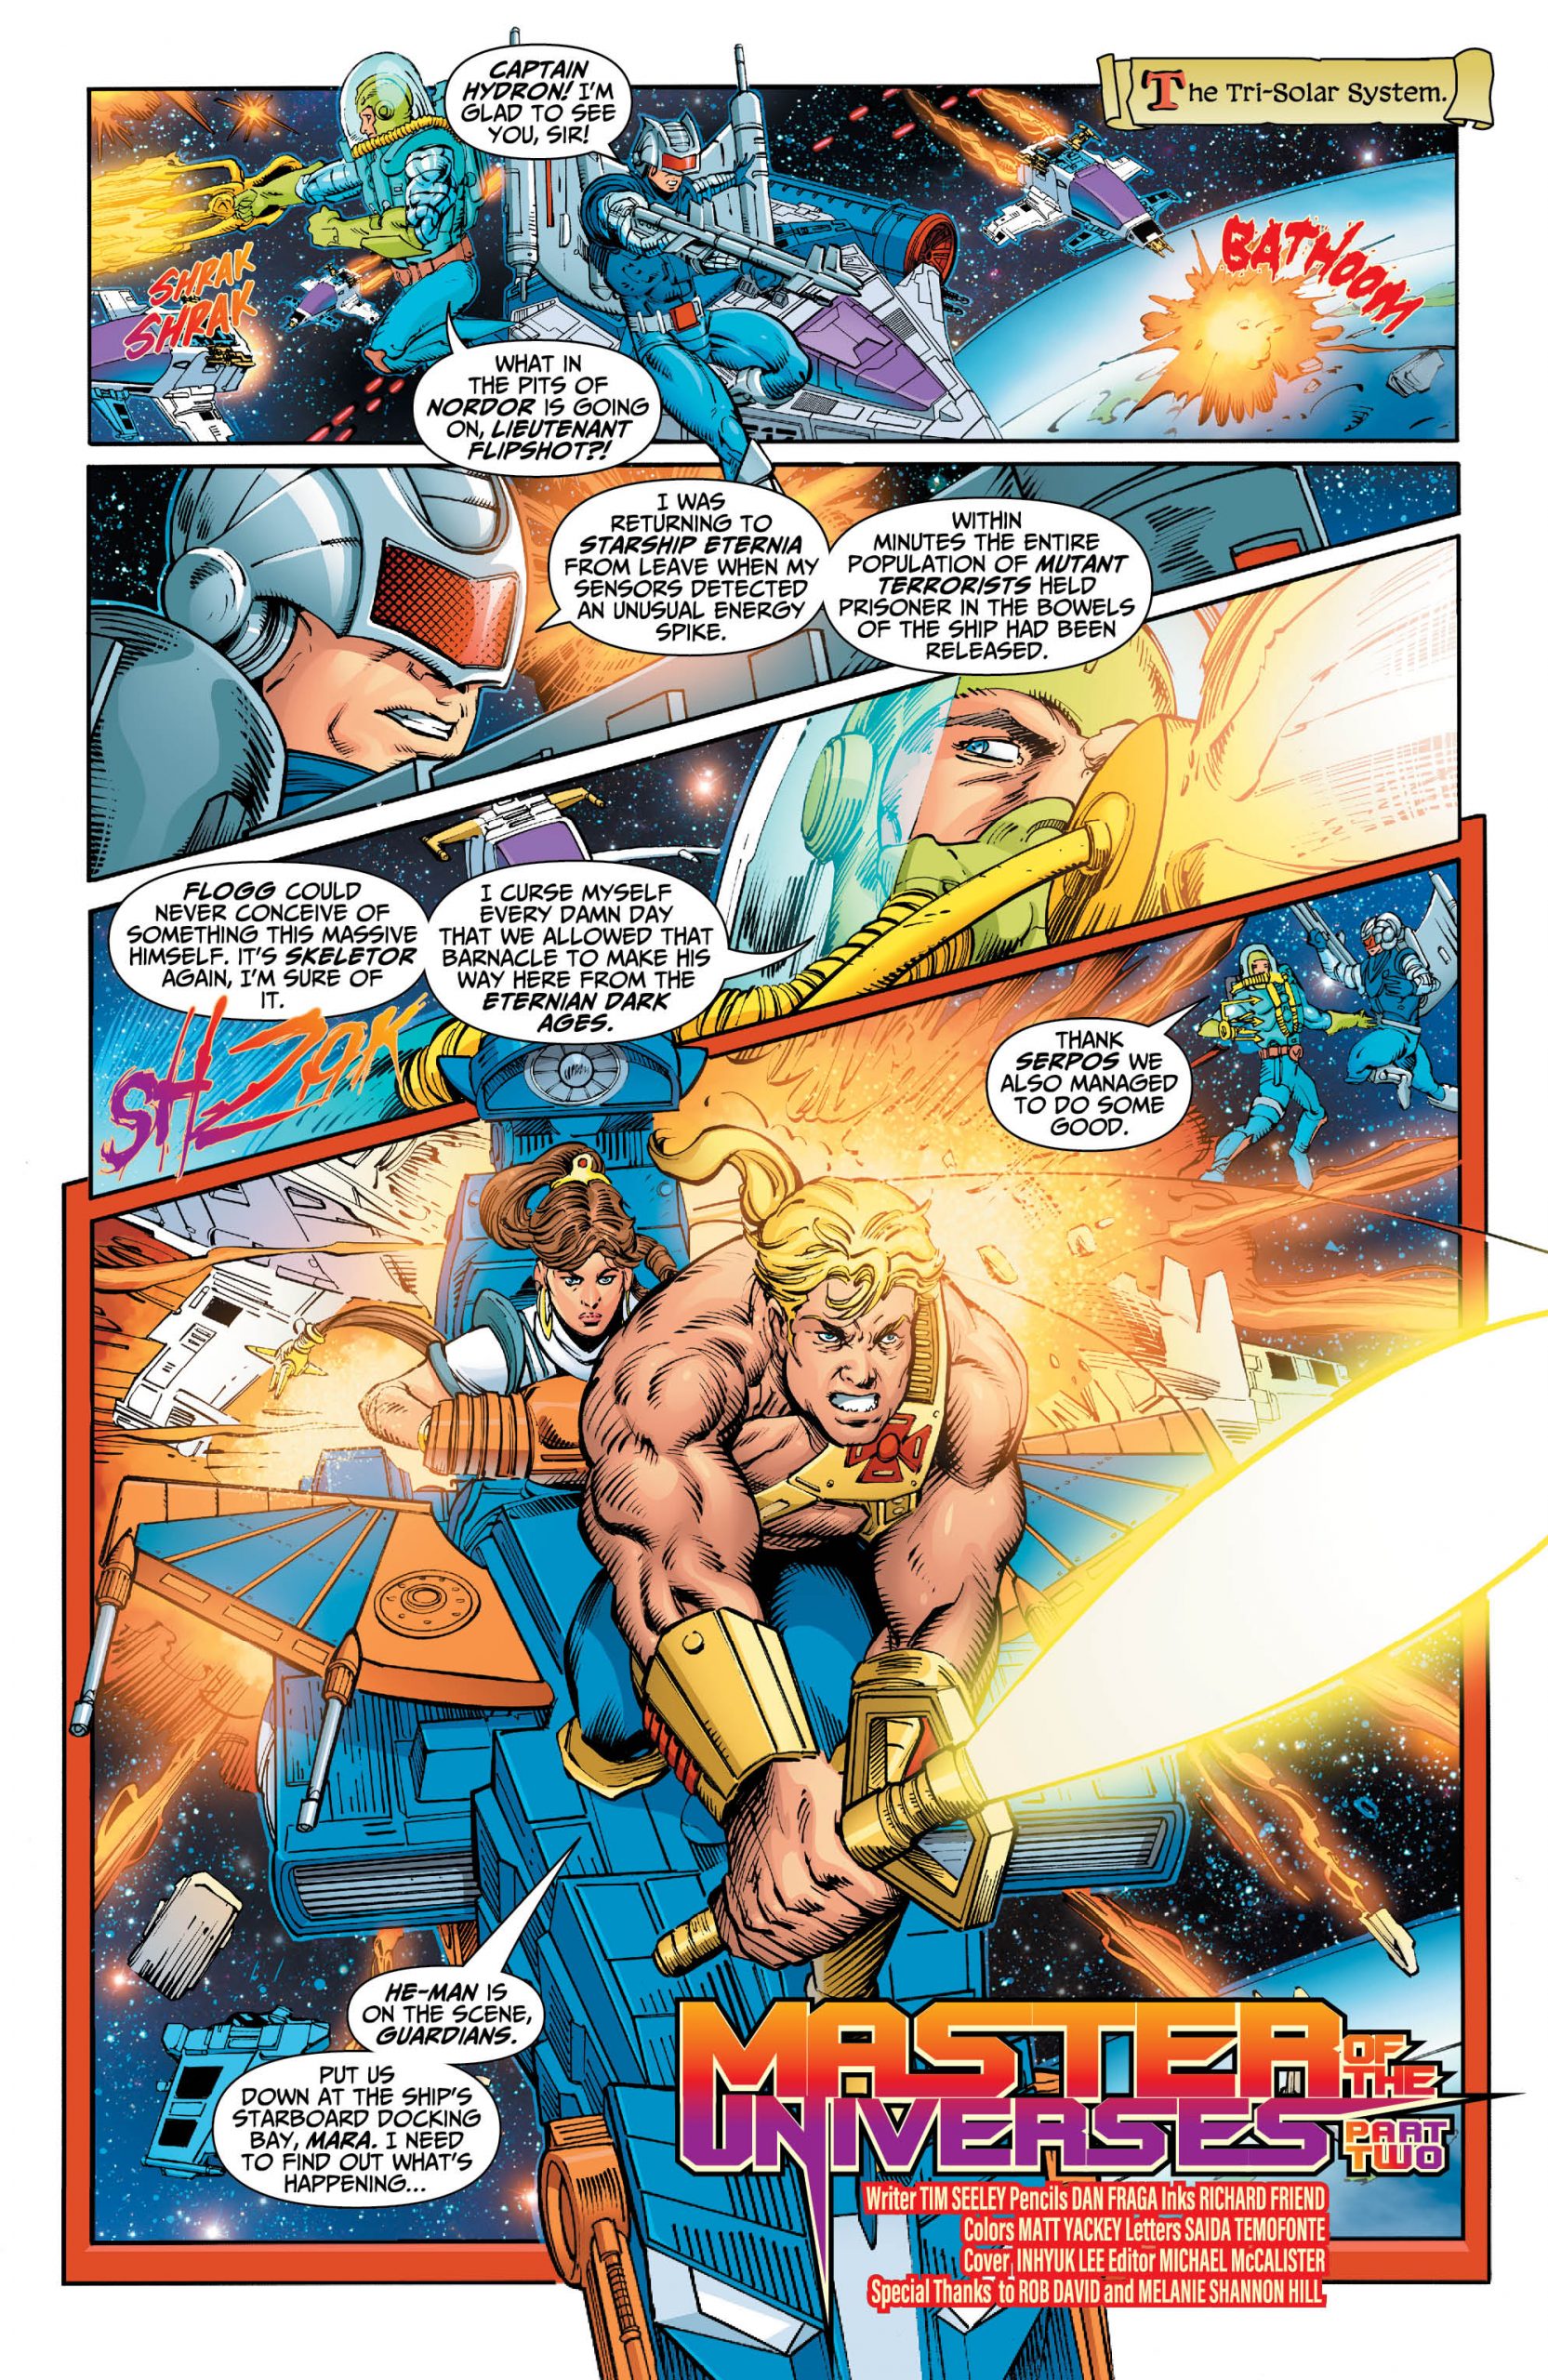 He-Man and the Masters of the Multiverse #2